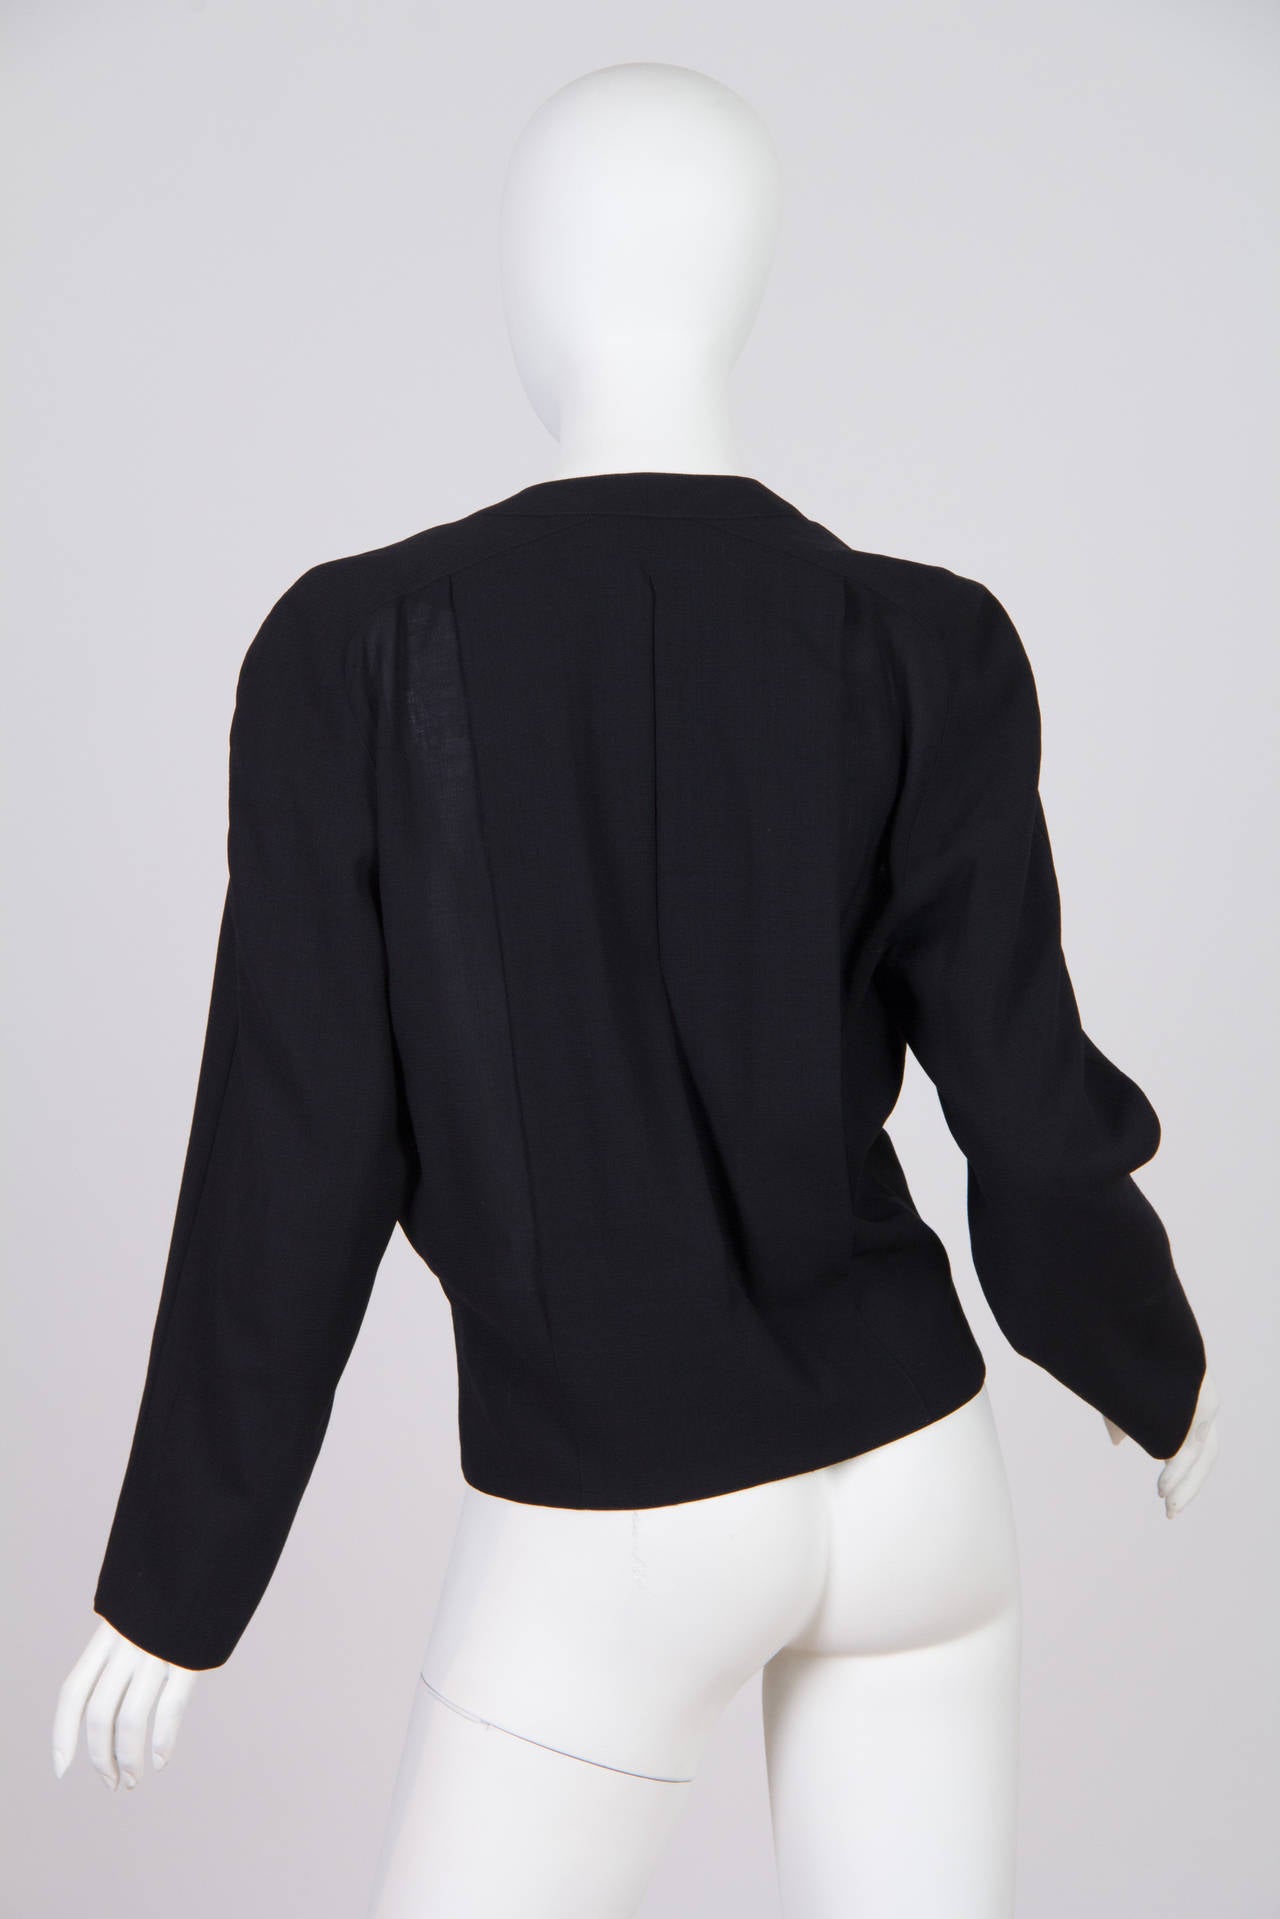 This jacket by Chloé has the silhouette of the 1980s, but also evokes the 1930s and 1940s. The dropped waist, vintage-style buttons and the careful draping around the bust bring to mind earlier styles of tailoring. The deep V neck keeps the